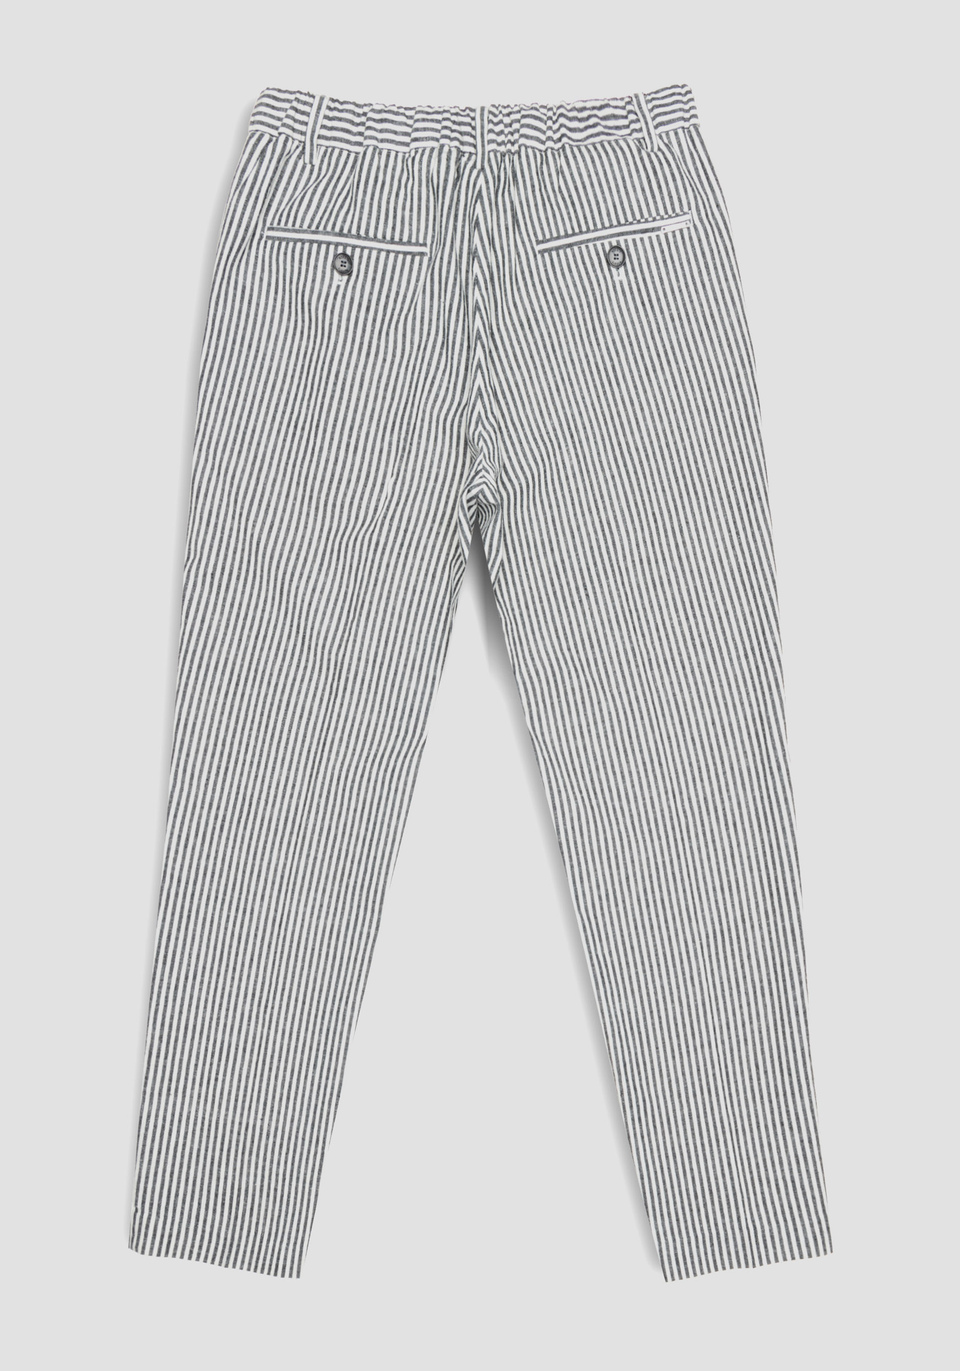 “GUSTAF” CARROT-FIT TROUSERS IN LINEN BLEND WITH STRIPED PRINT - Antony Morato Online Shop